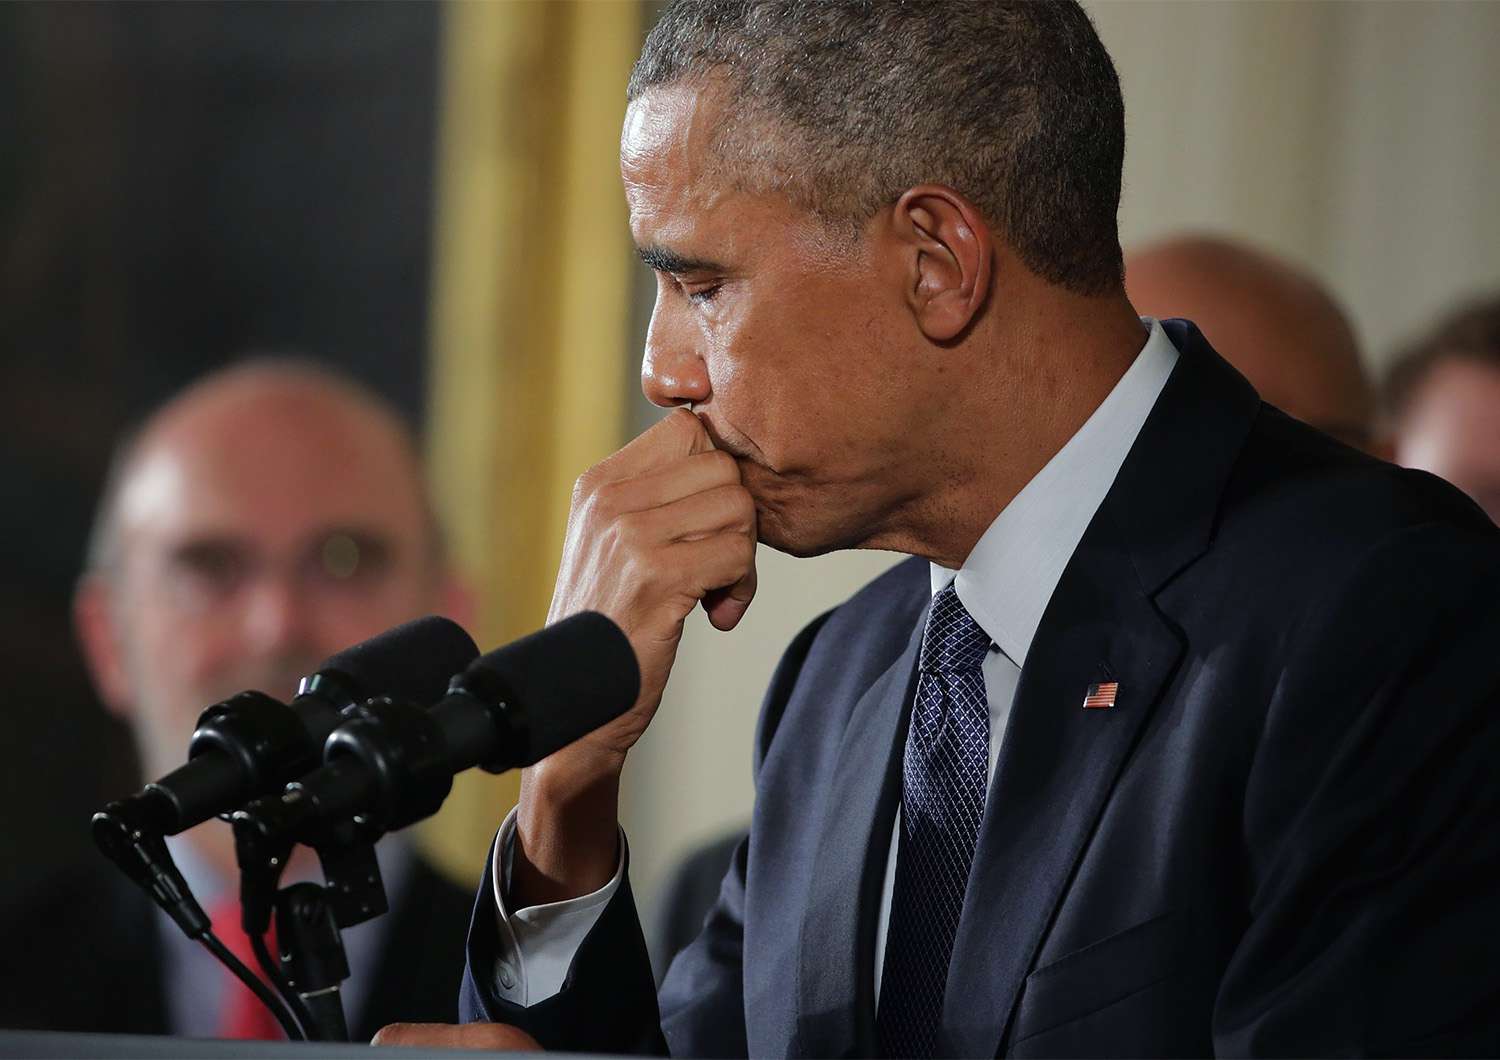 WASHINGTON, DC - JANUARY 05: U.S. President Barack Obama pauses as he talks about the victims of the 2012 Sandy Hook Elementary School shooting and about his efforts to increase federal gun control in the East Room of the White House January 5, 2016 in Washington, DC. Without approval from Congress, Obama is sidestepping the legislative process with executive actions to expand background checks for some firearm purchases and step up federal enforcement of existing gun laws. (Photo by Chip Somodevilla/Getty Images)